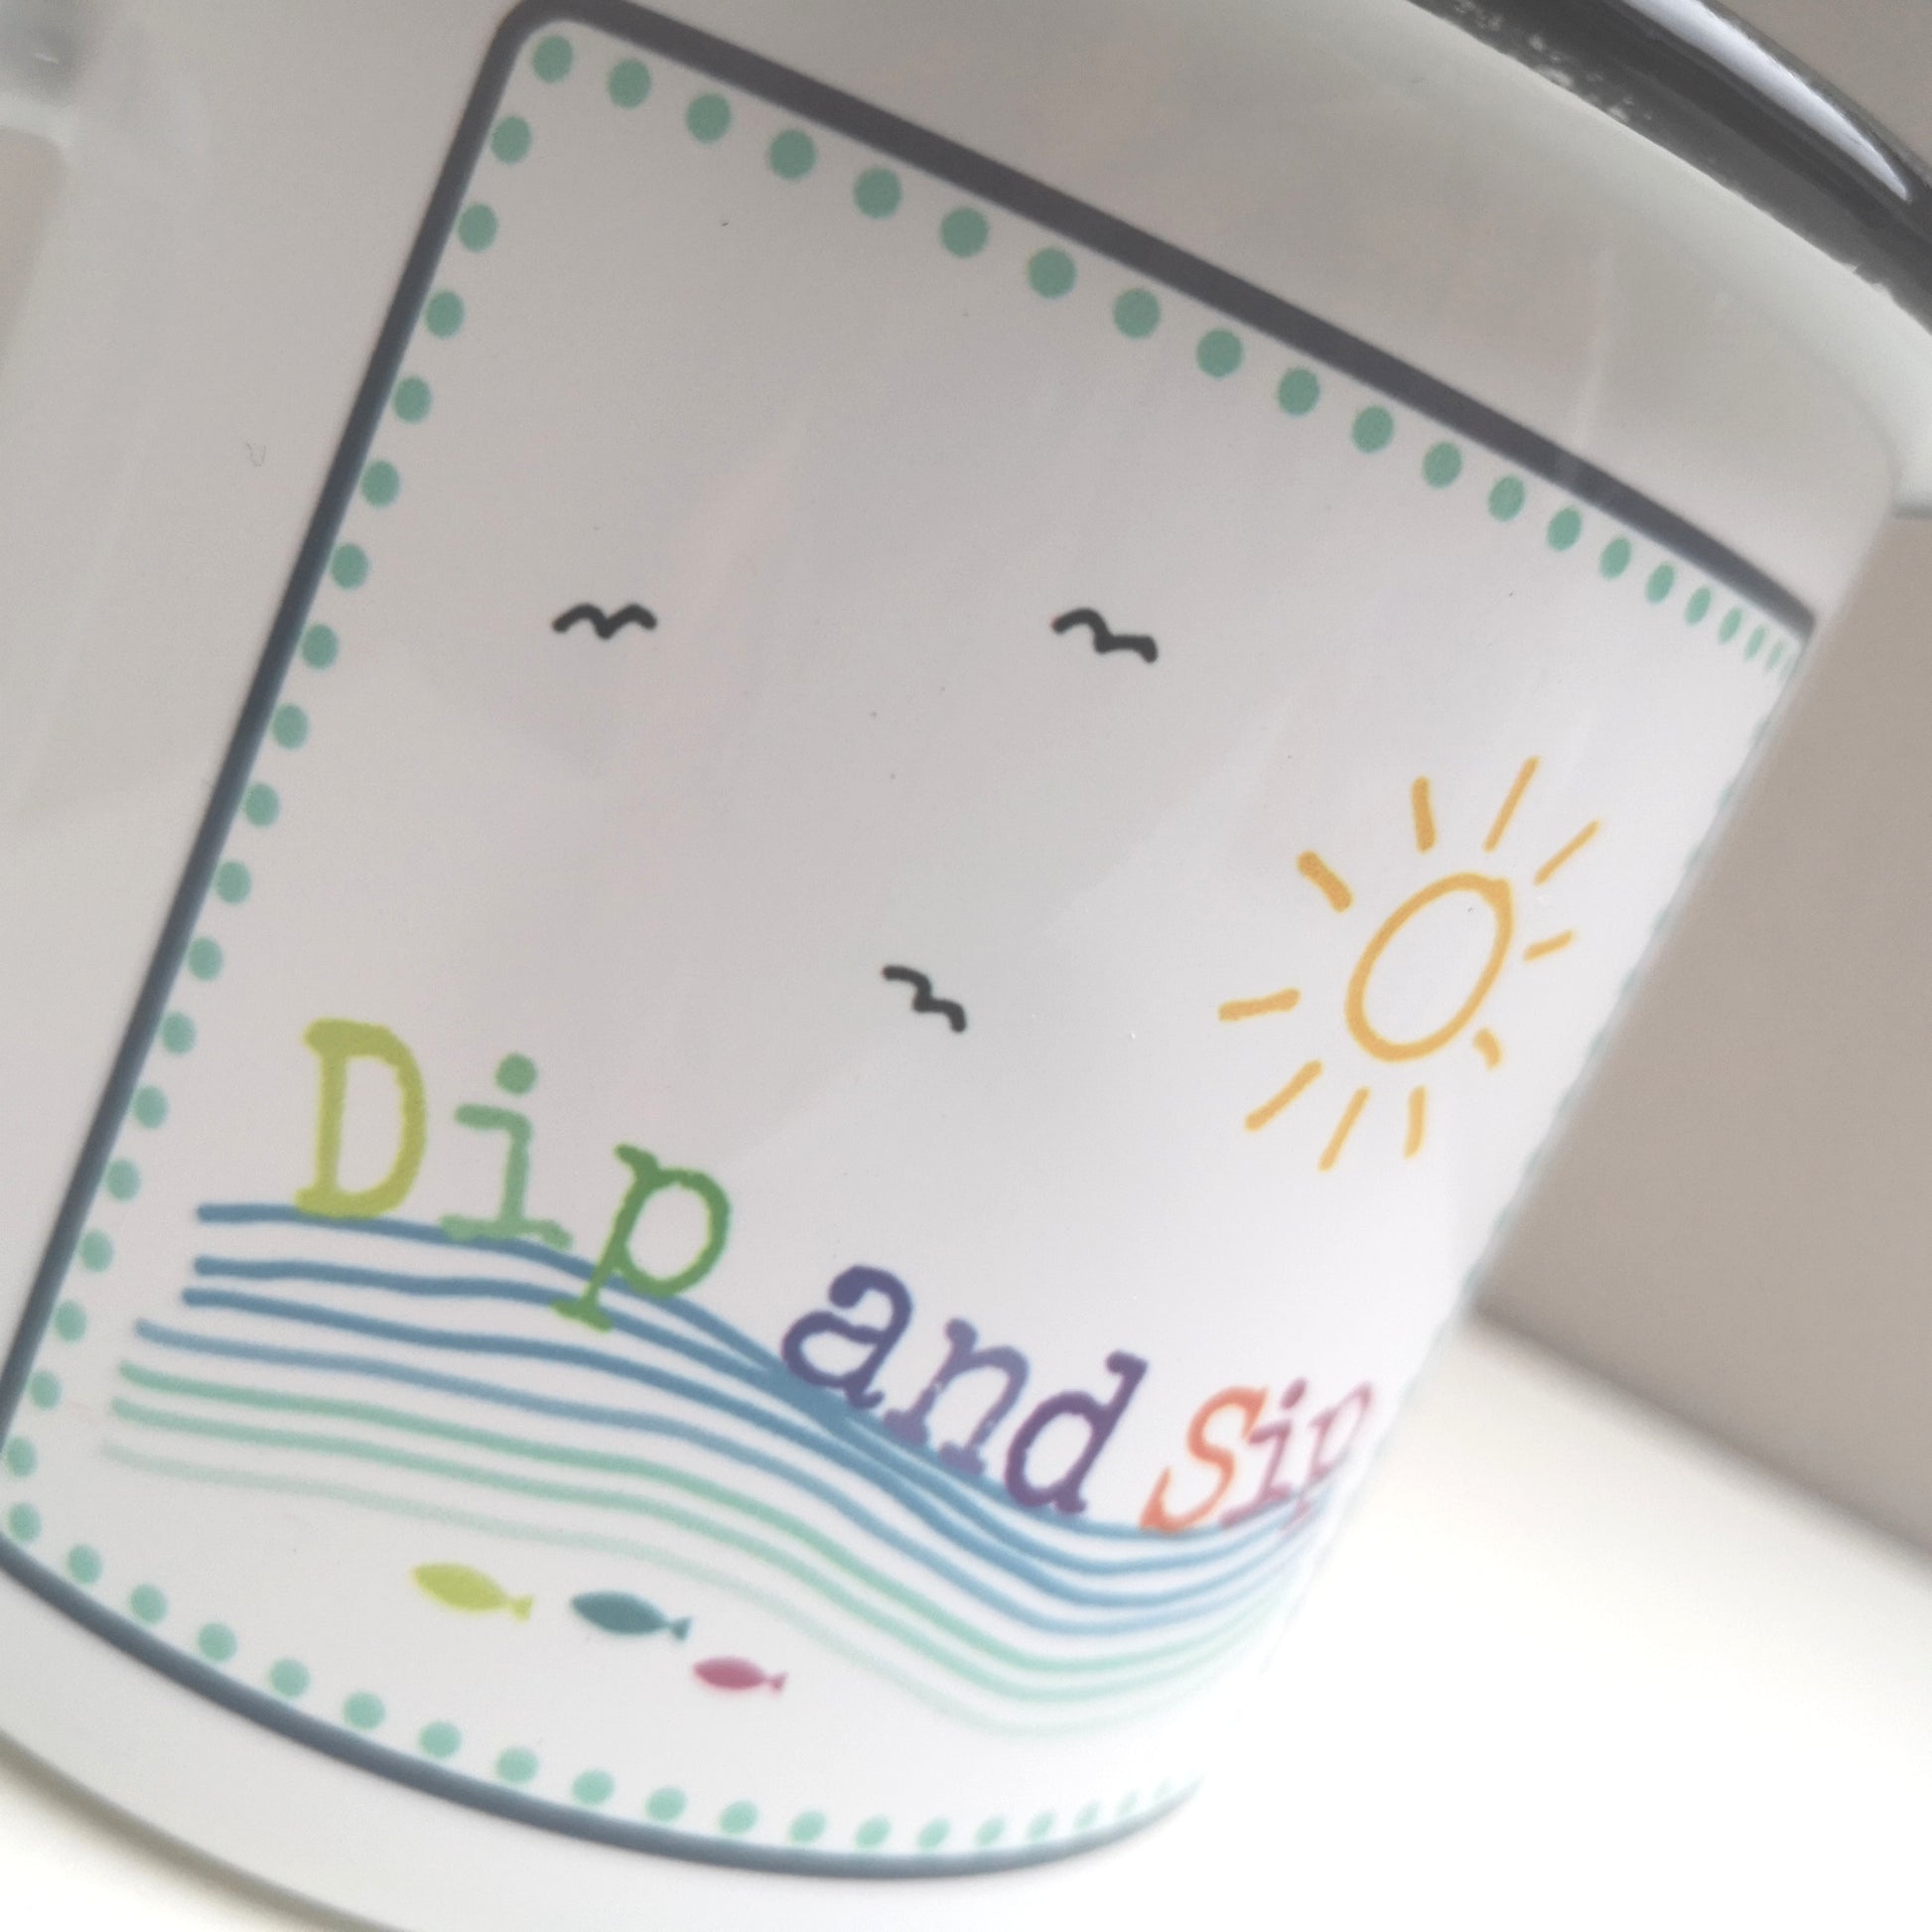 A white steel enamel mug with a year round swimmer's mantra on it - dip and sip. Photo shows a close up of the rainbow coloured design with 3 fish